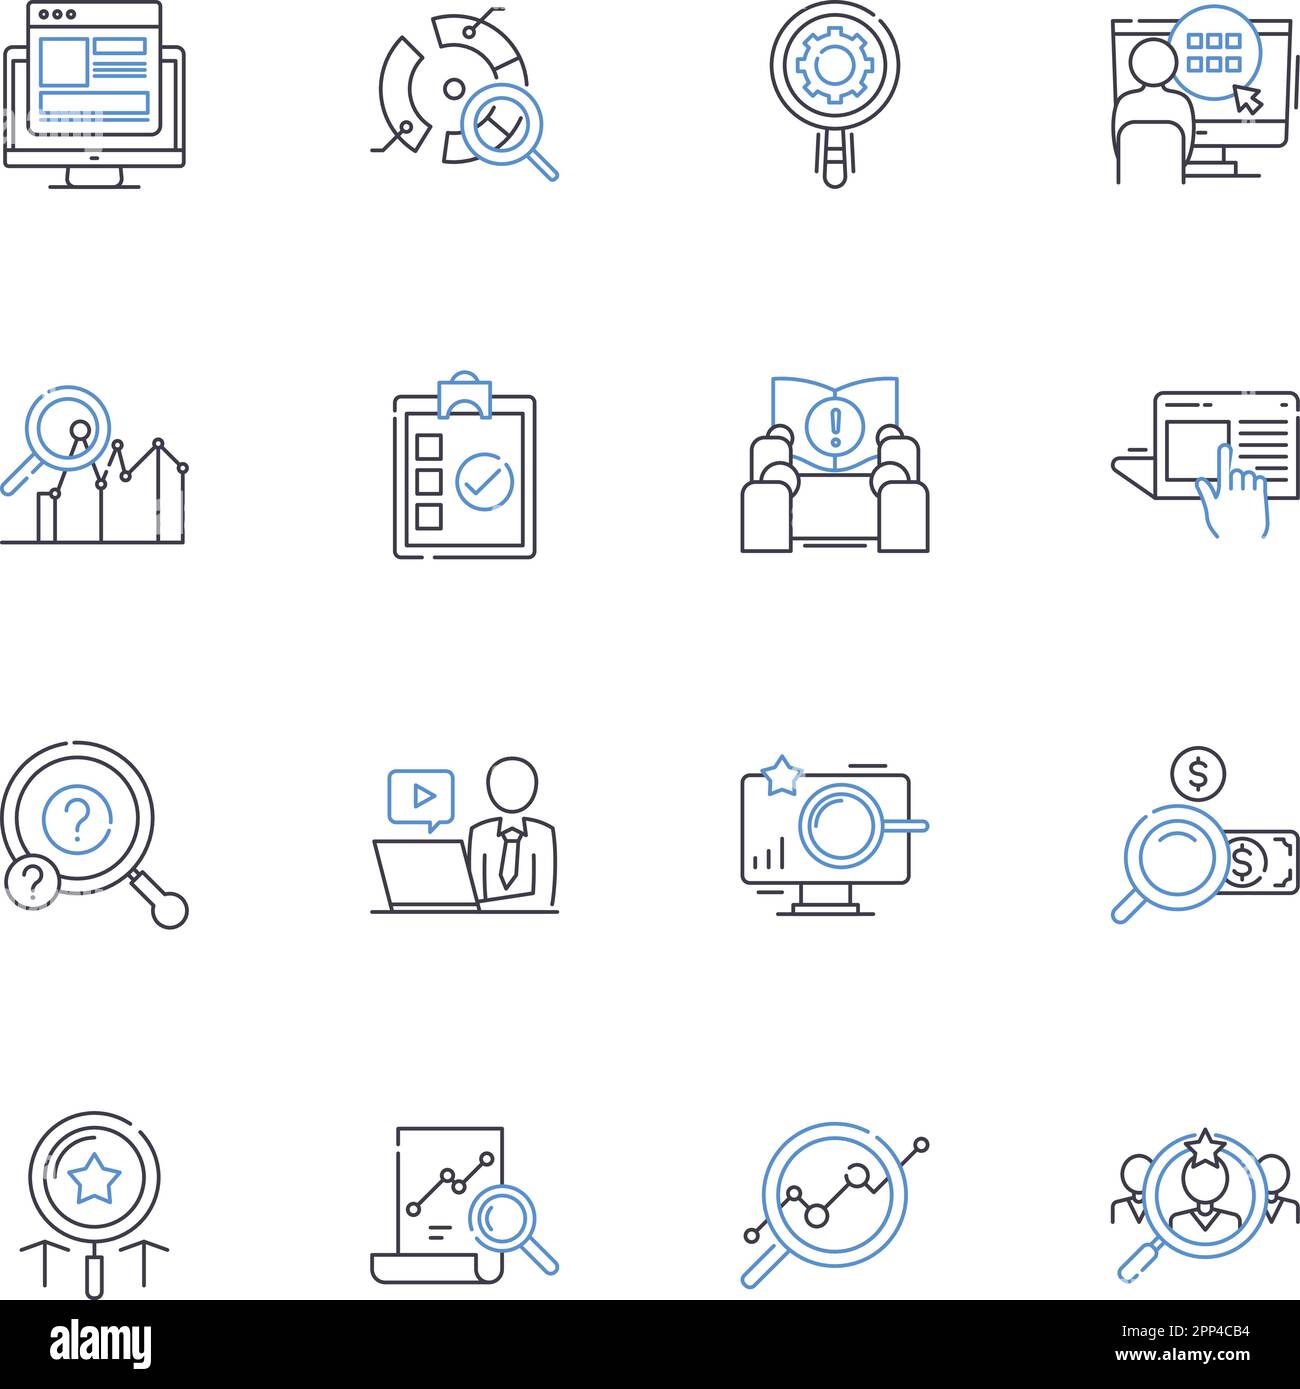 Assessment line icons collection. Evaluation, Testing, Grading, Analysis, Measurement, Benchmarking, Feedback vector and linear illustration. Scoring Stock Vector